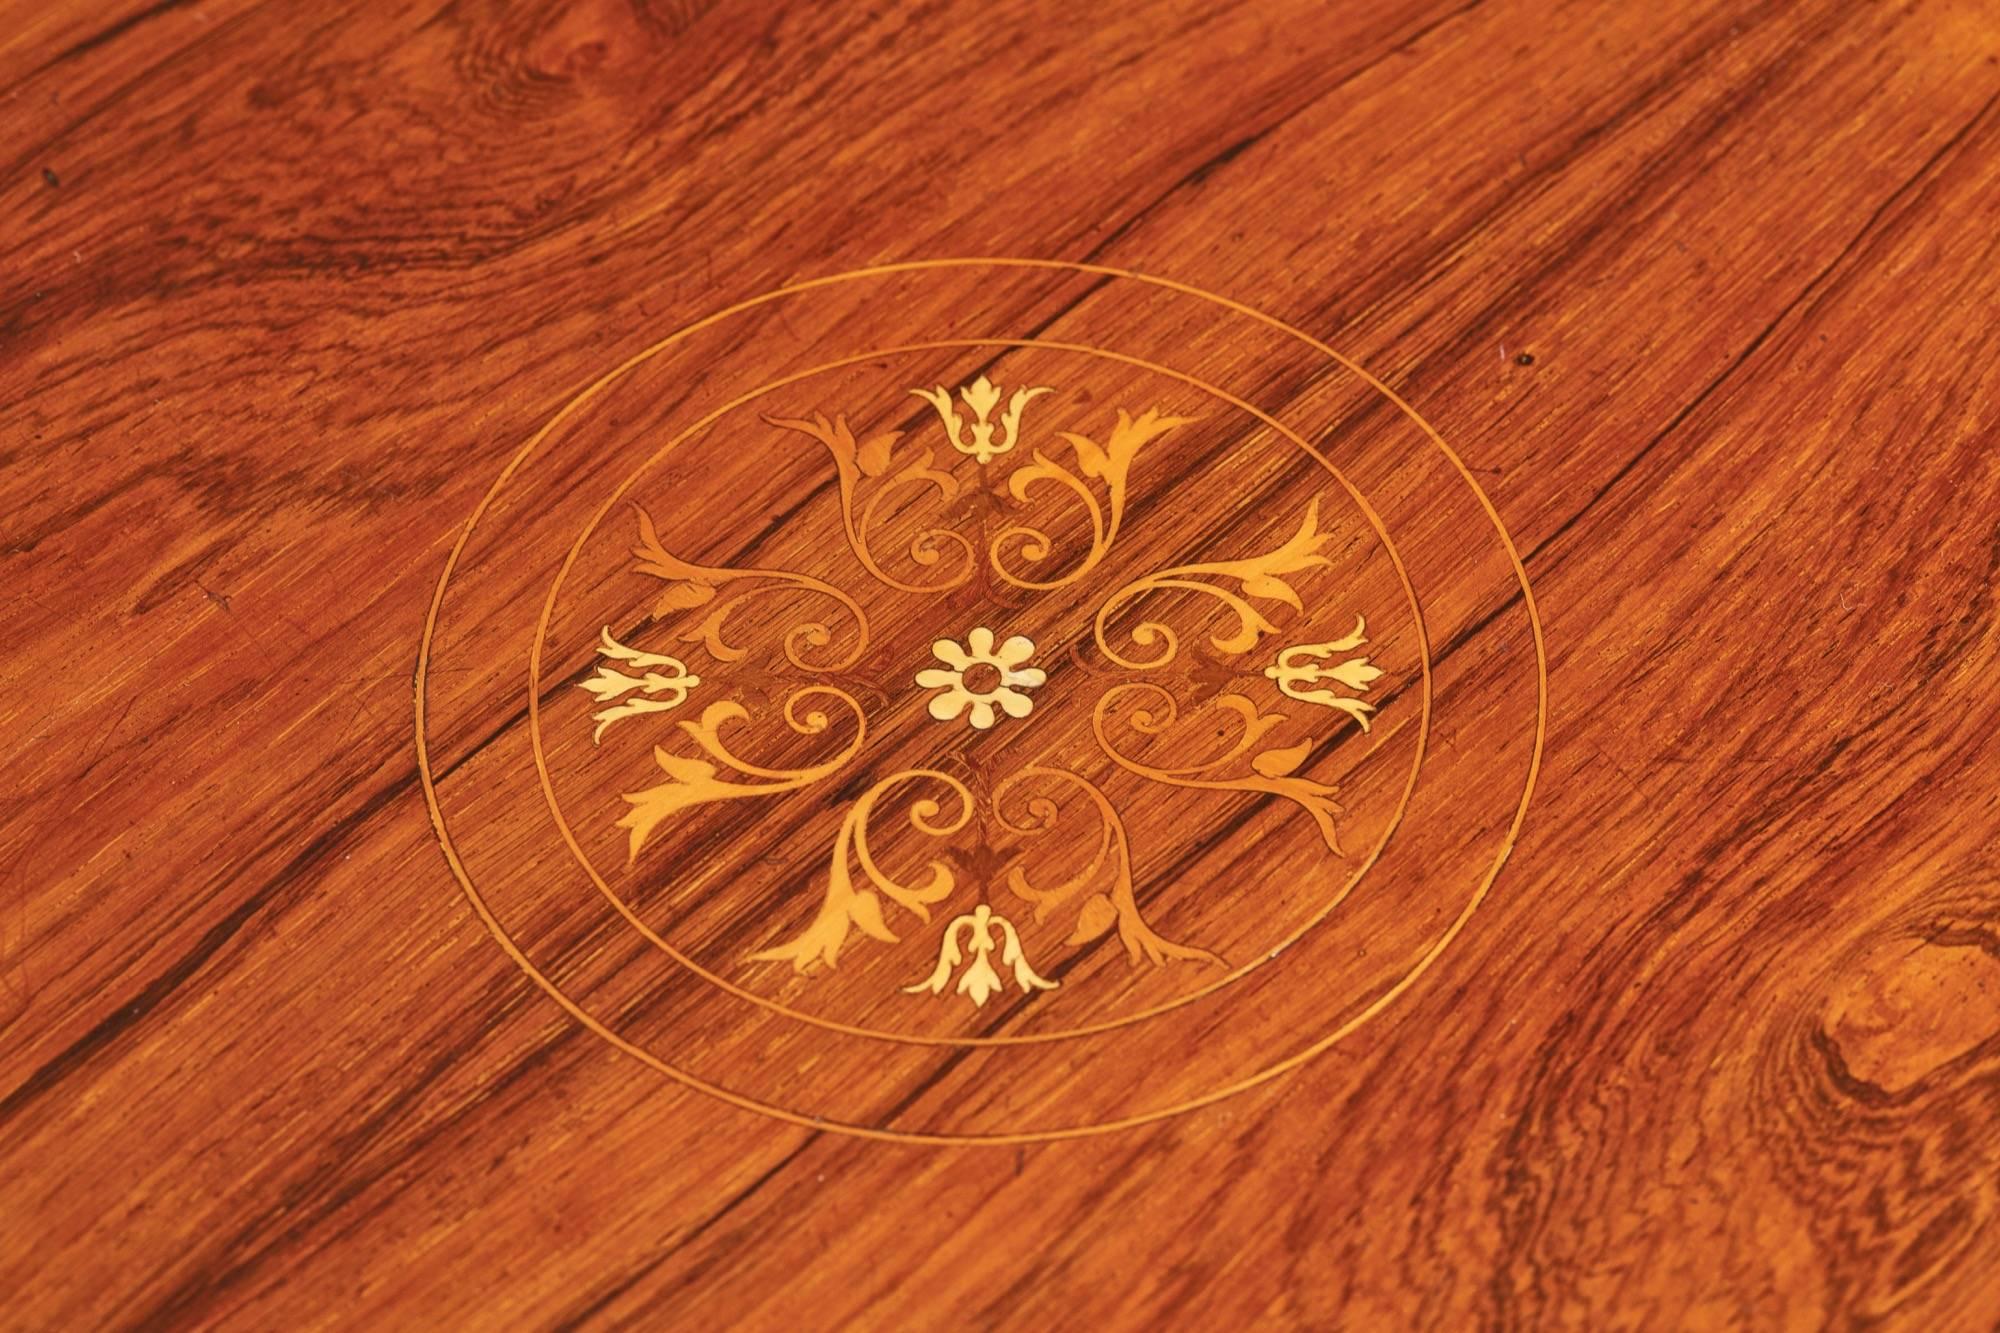 A rosewood inlaid centre table, with marquetry centre floral inlay, marquetry inlaid boxwood banding, inlaid frieze supported by four inlaid square tapering legs terminating in spade feet

Good colour and condition.